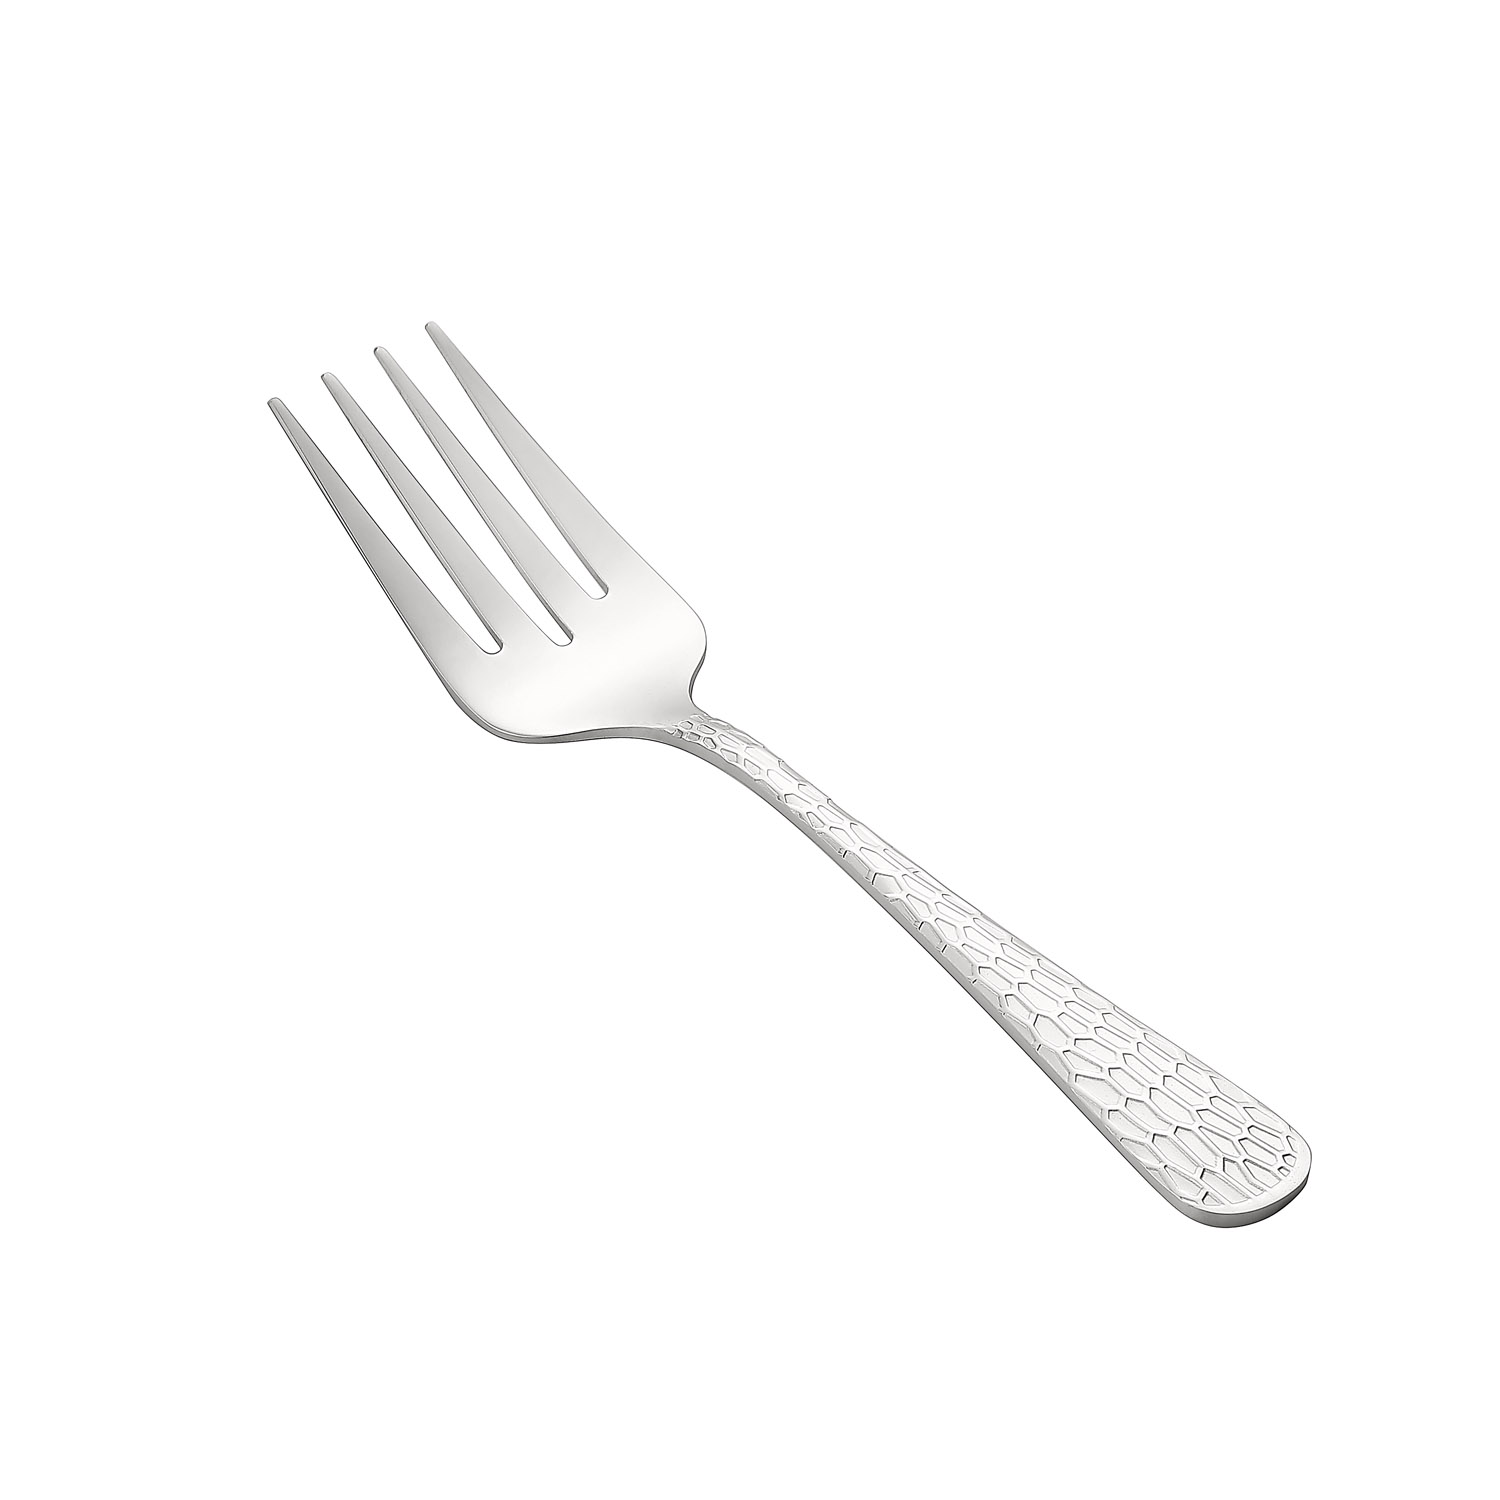 CAC China 8015-18 Auspicious Cold Meat Fork, Extra Heavy Weight 18/8, 8-1/2" - 1 dozen